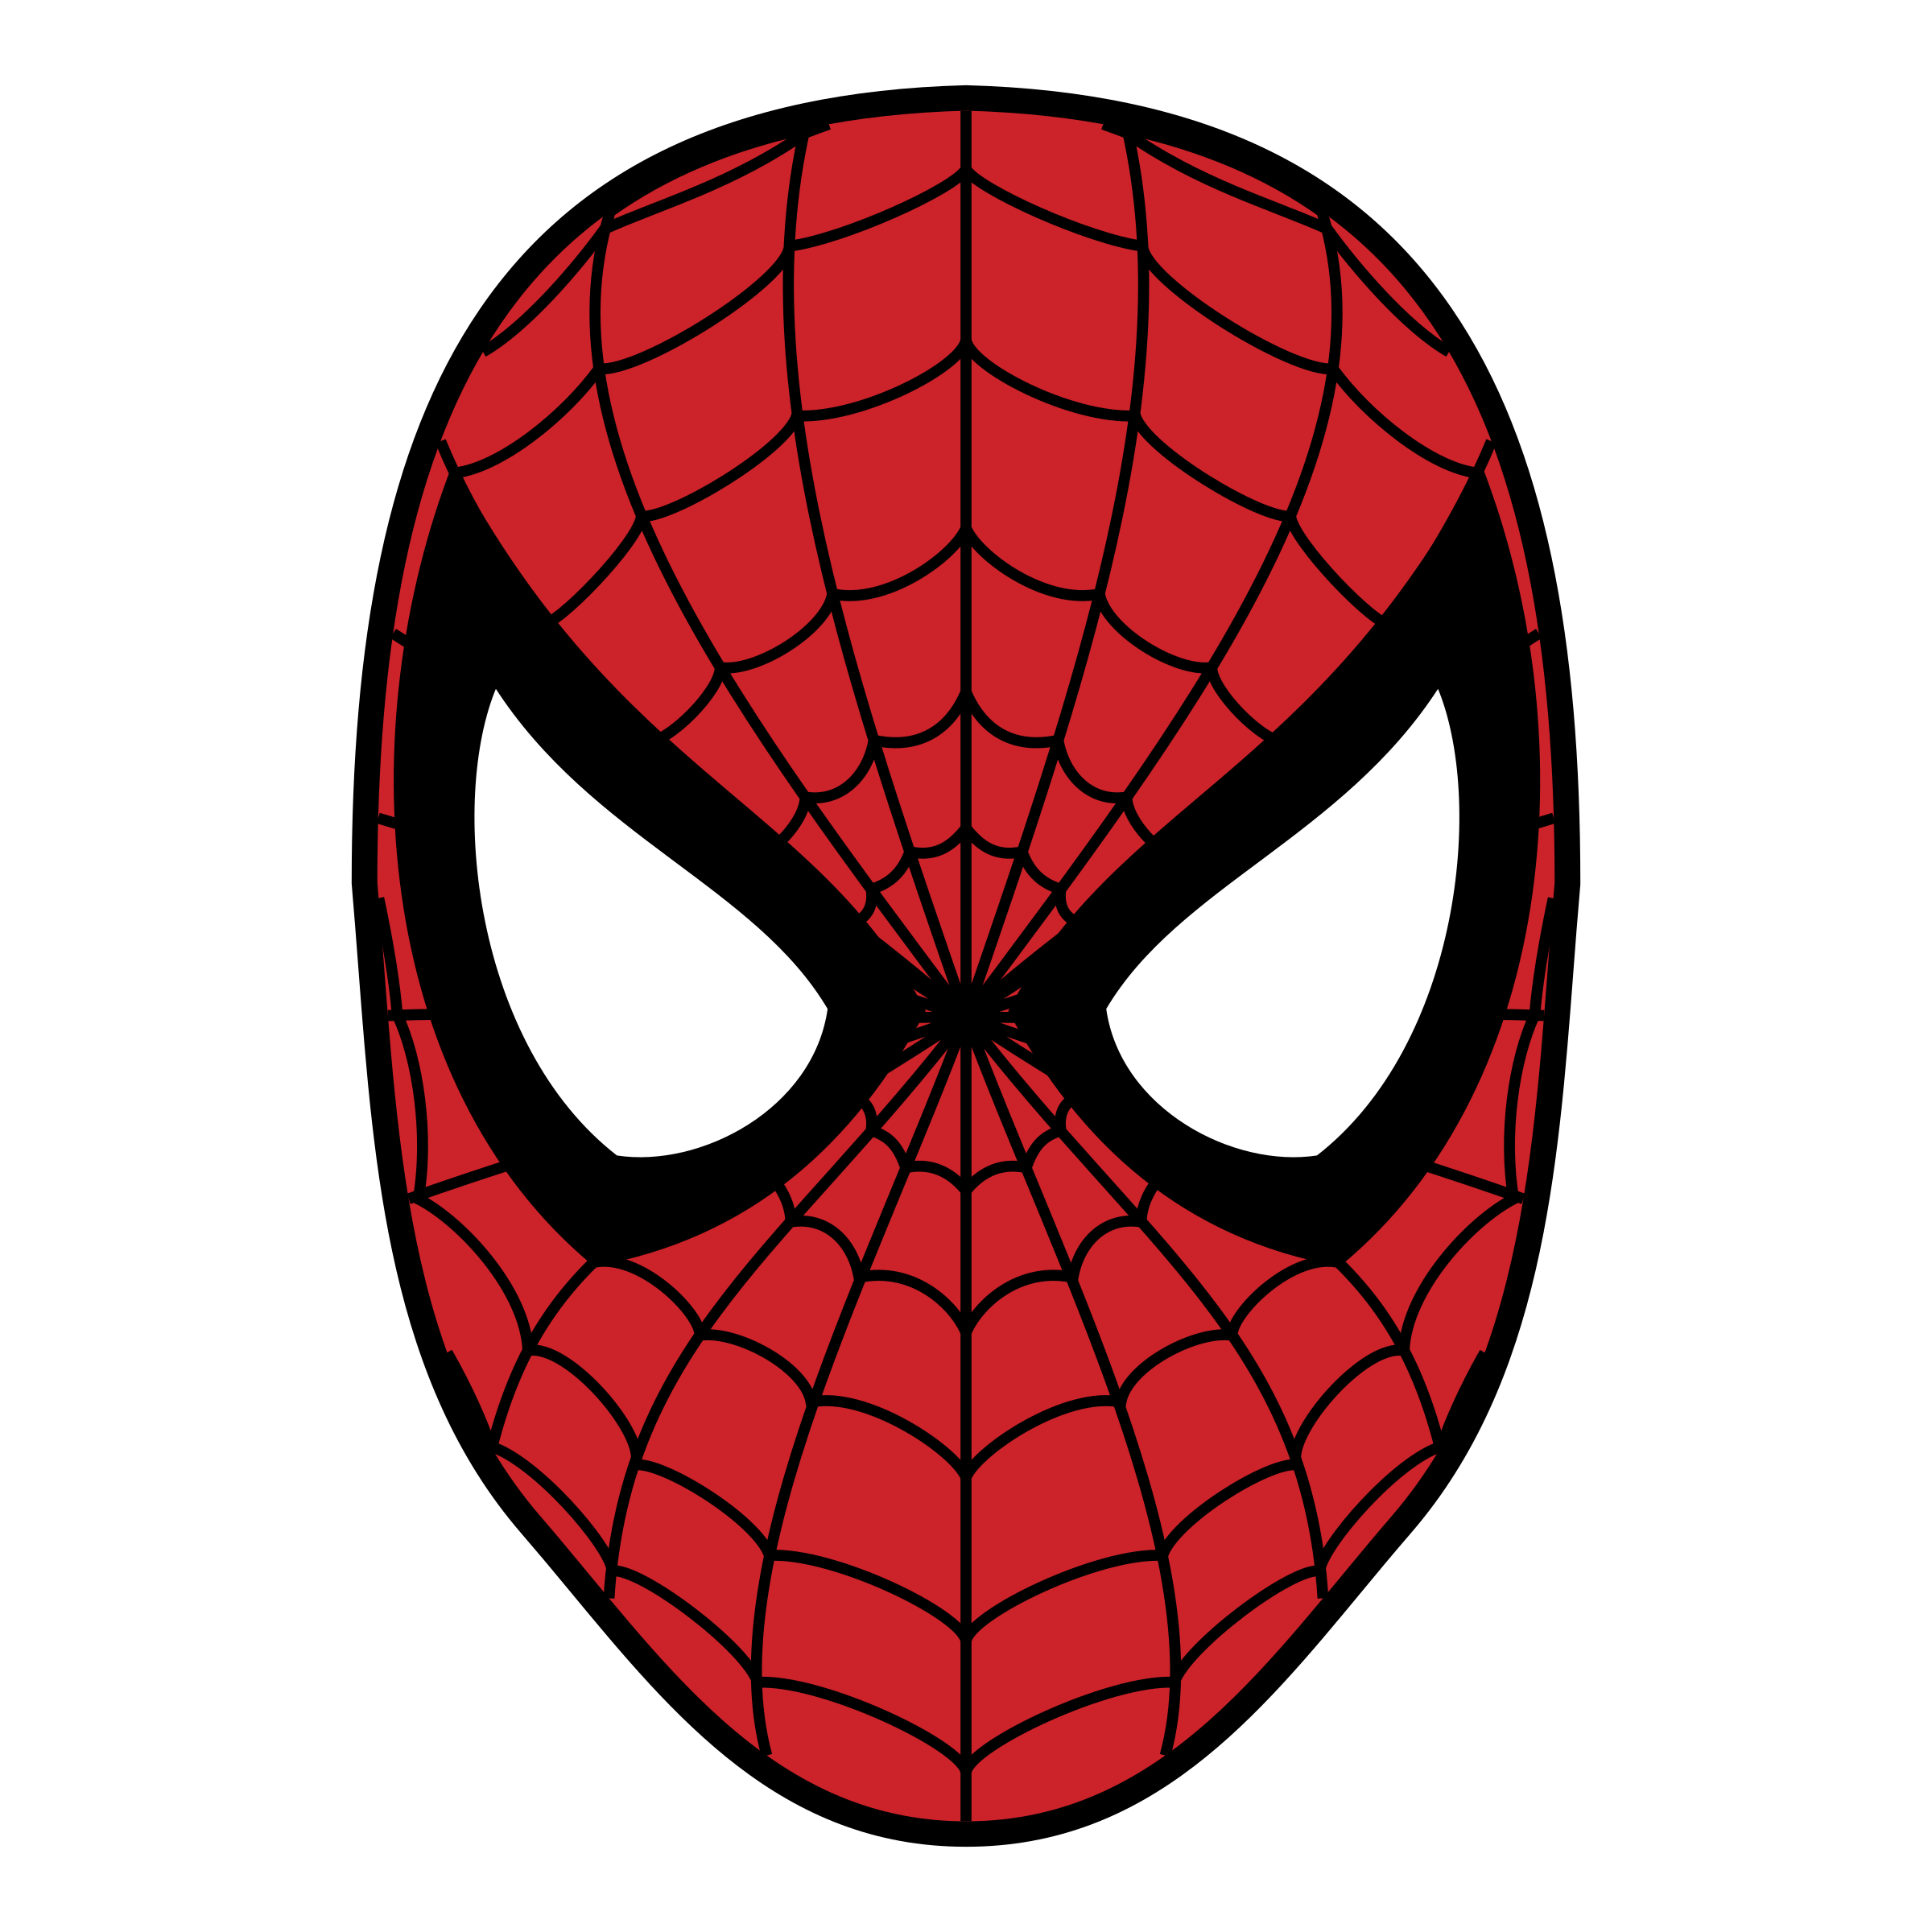 Spider Man Scalable Vector Graphics Clip Art Logo Spider Man Png